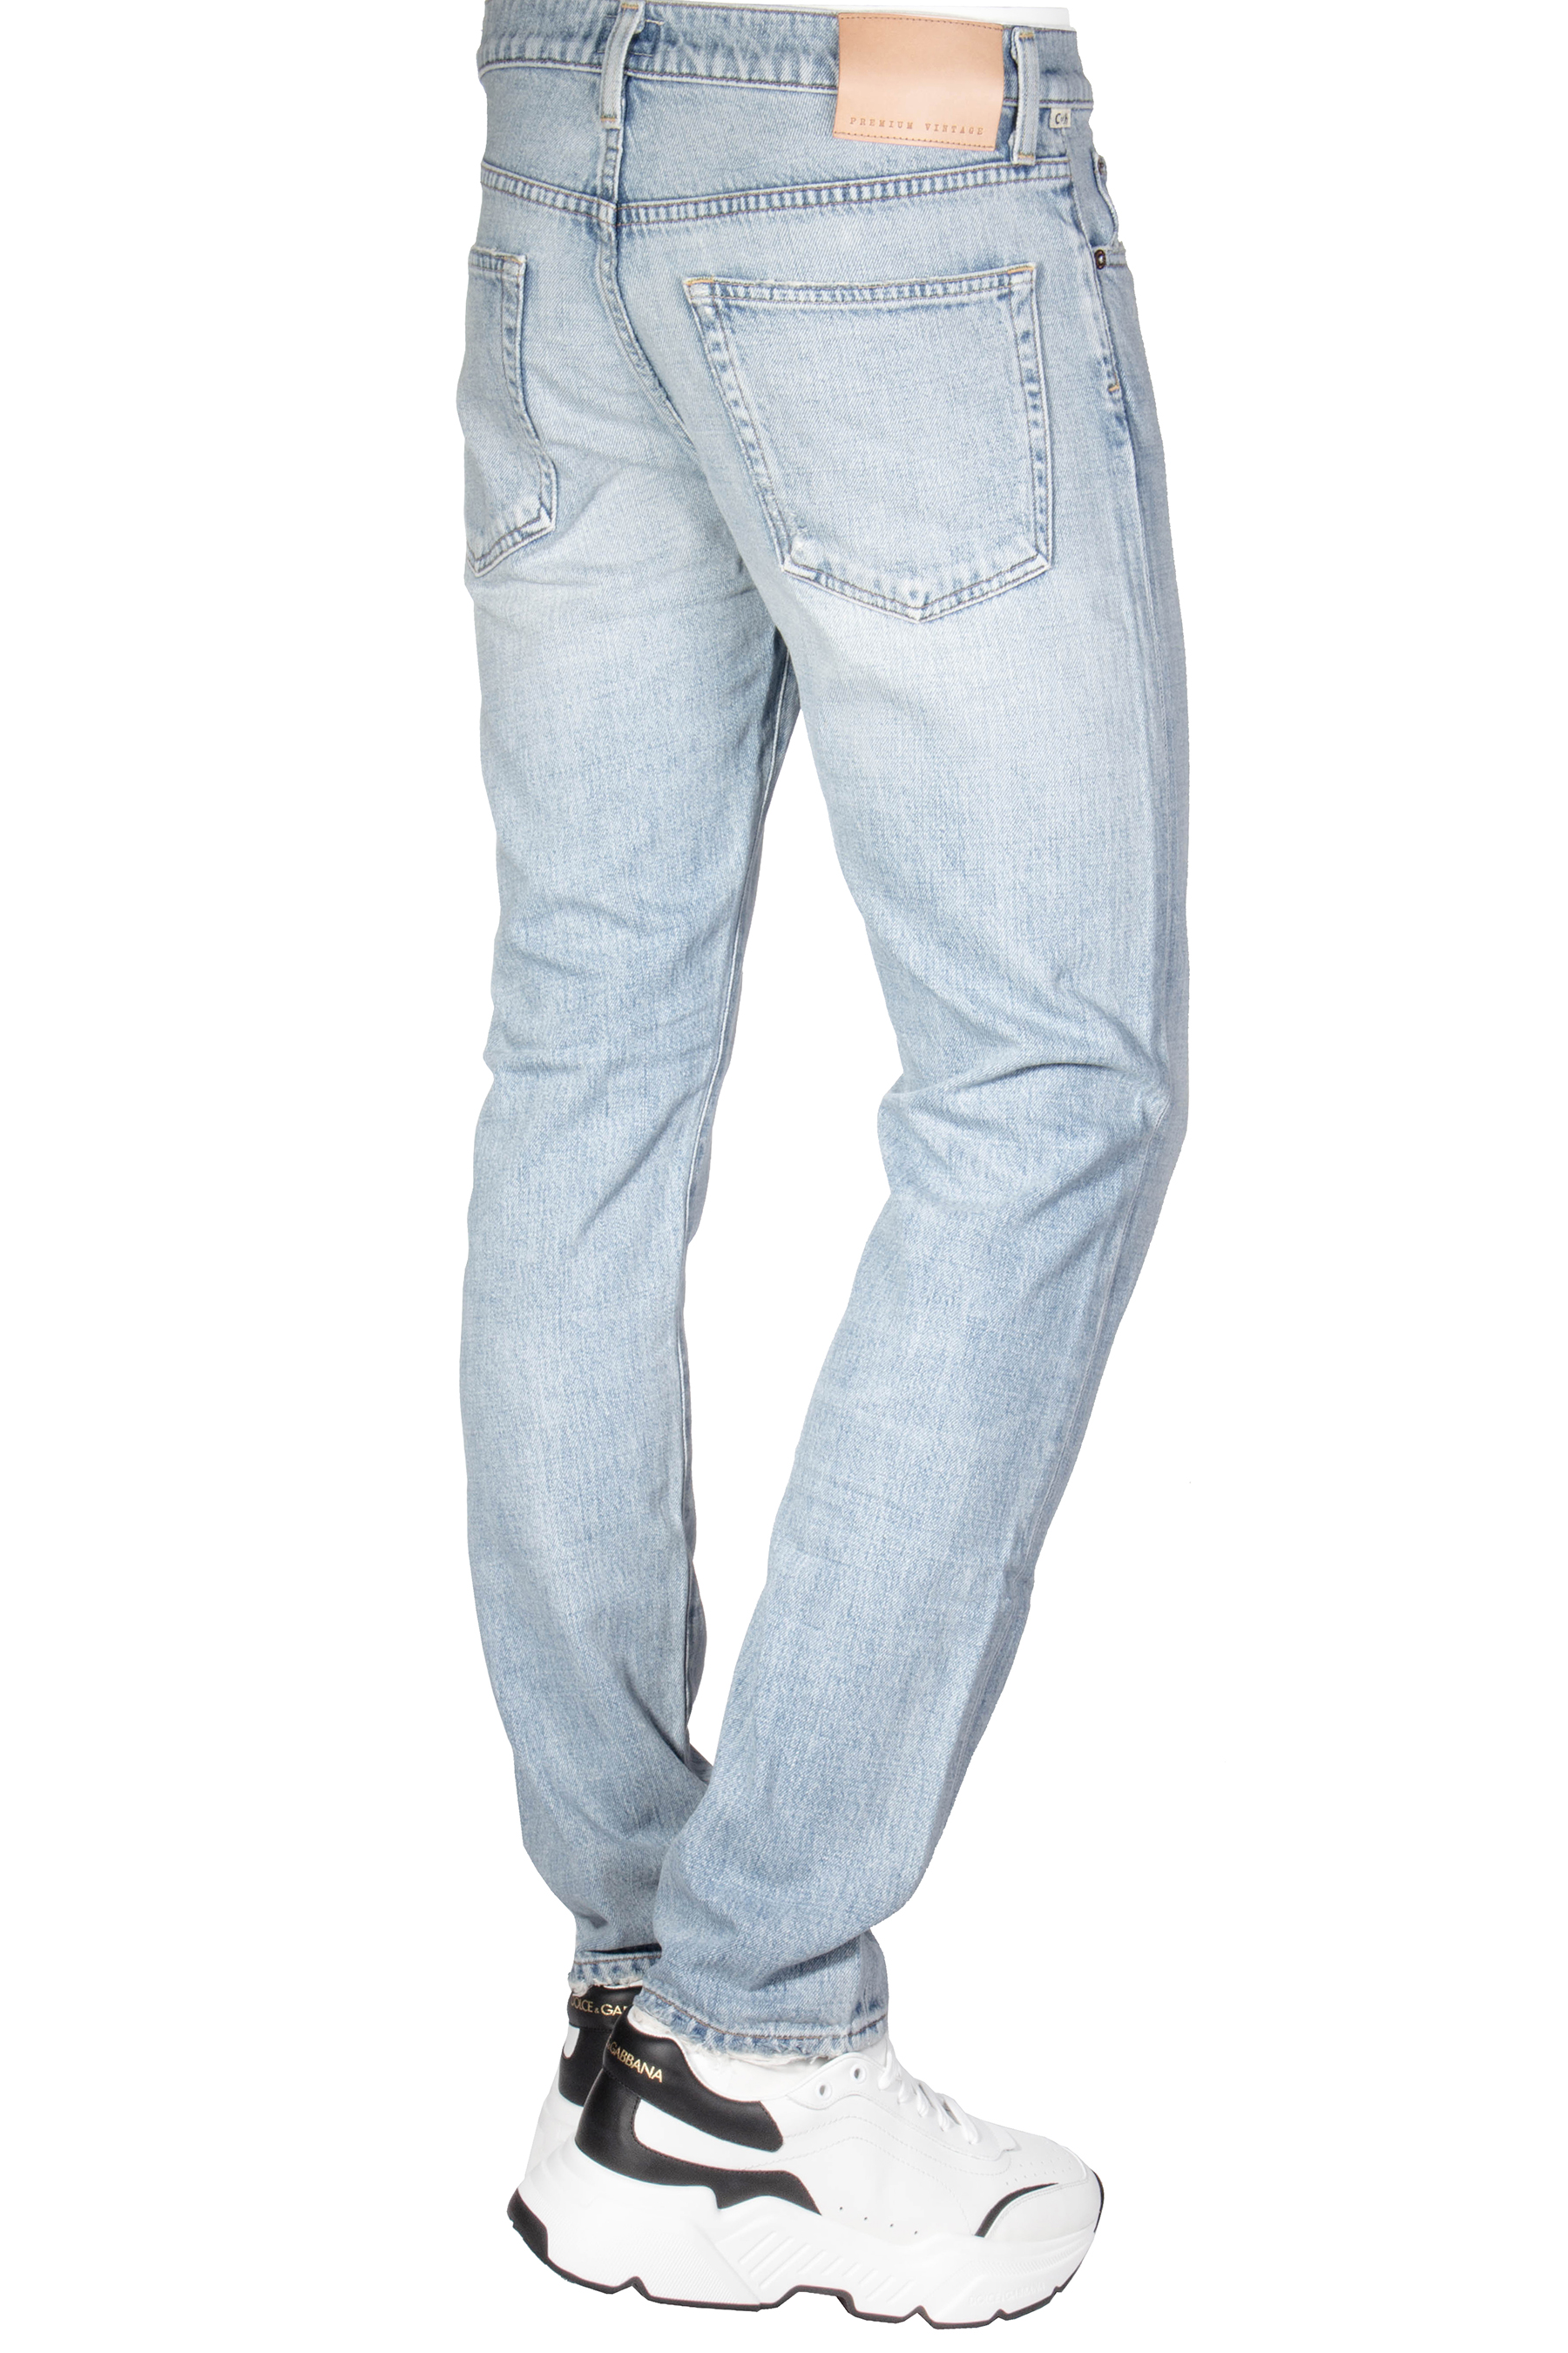 Store CITIZENS Jeans & HUMANITY The Jeans Lyric Hosen Online | | Kleidung Slim Jeans London | | | Tapered Men OF mientus